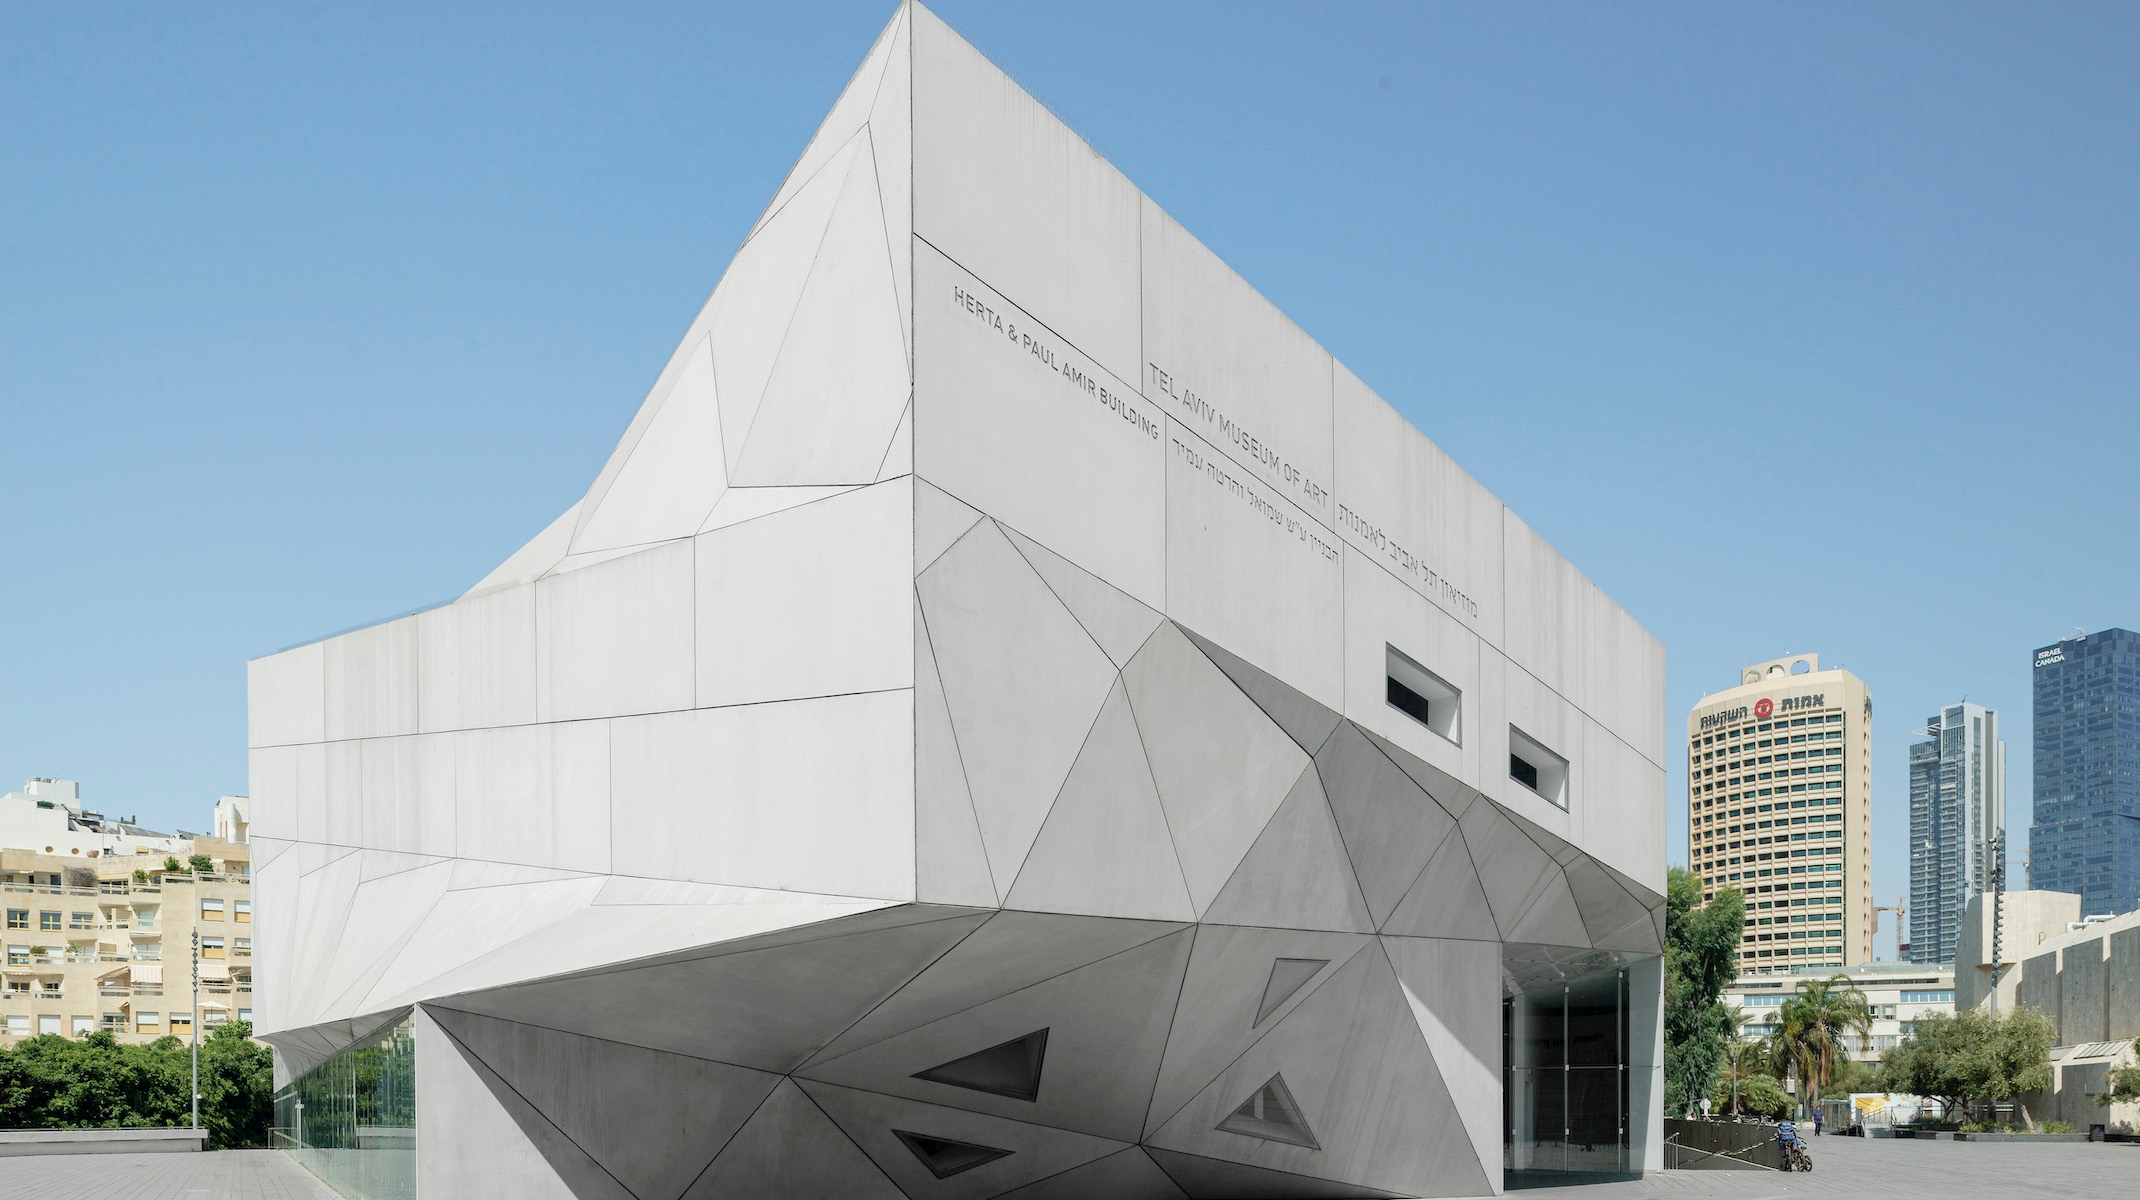 The Herta and Paul Amir Building of the Tel Aviv Museum of Art (Francesco Russo/View Pictures/Universal Images Group via Getty Images)